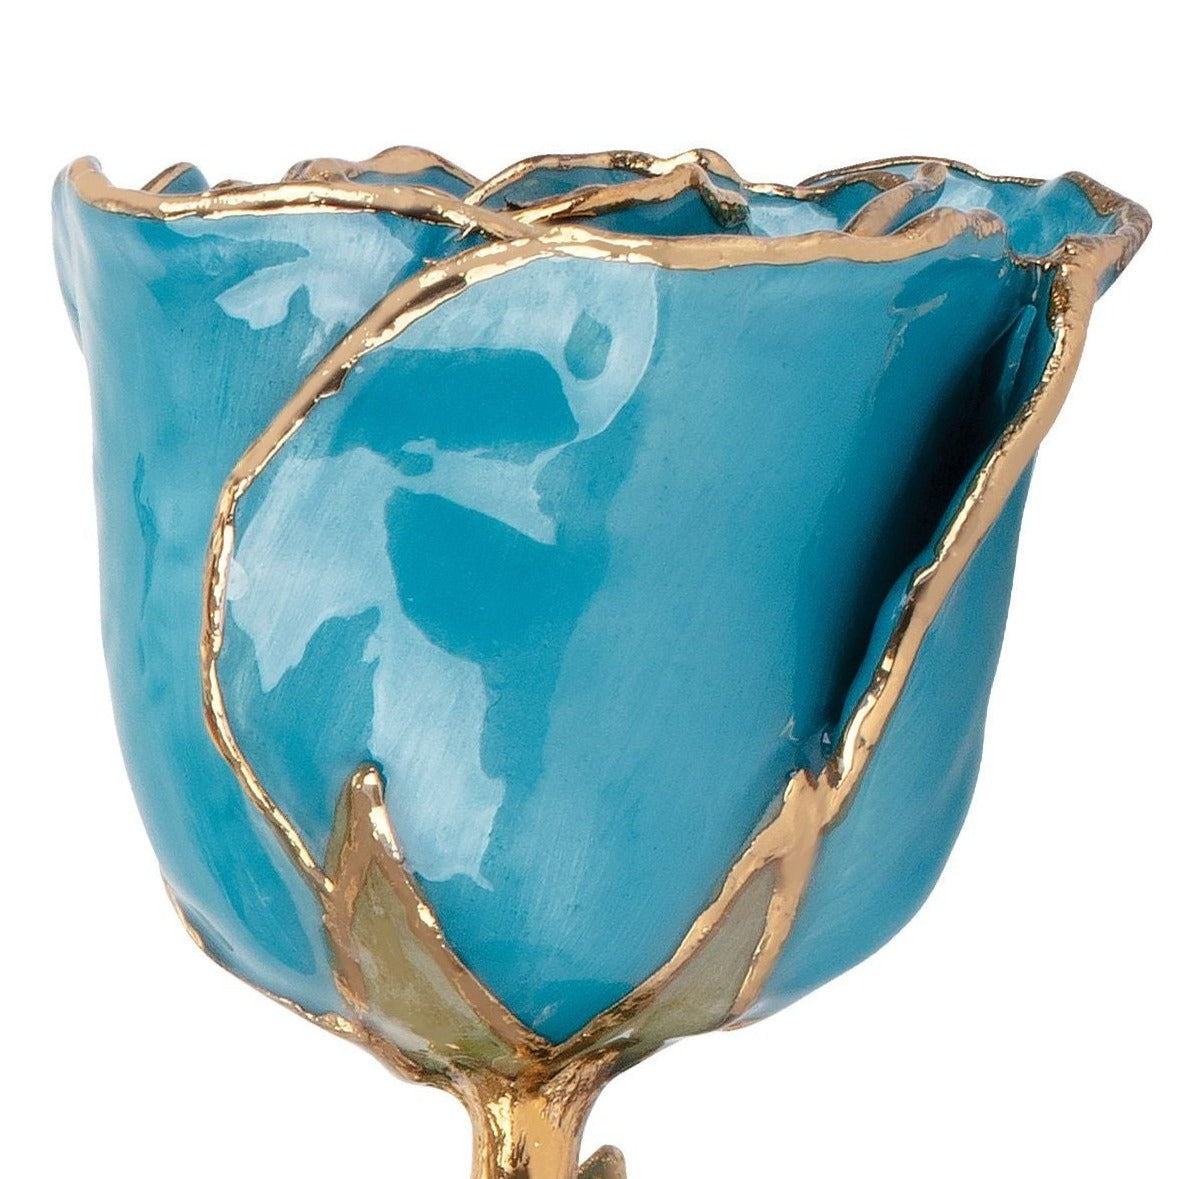 Preserved Aquamarine Colored Rose with 24K Gold Trim for Luxury Home Decor